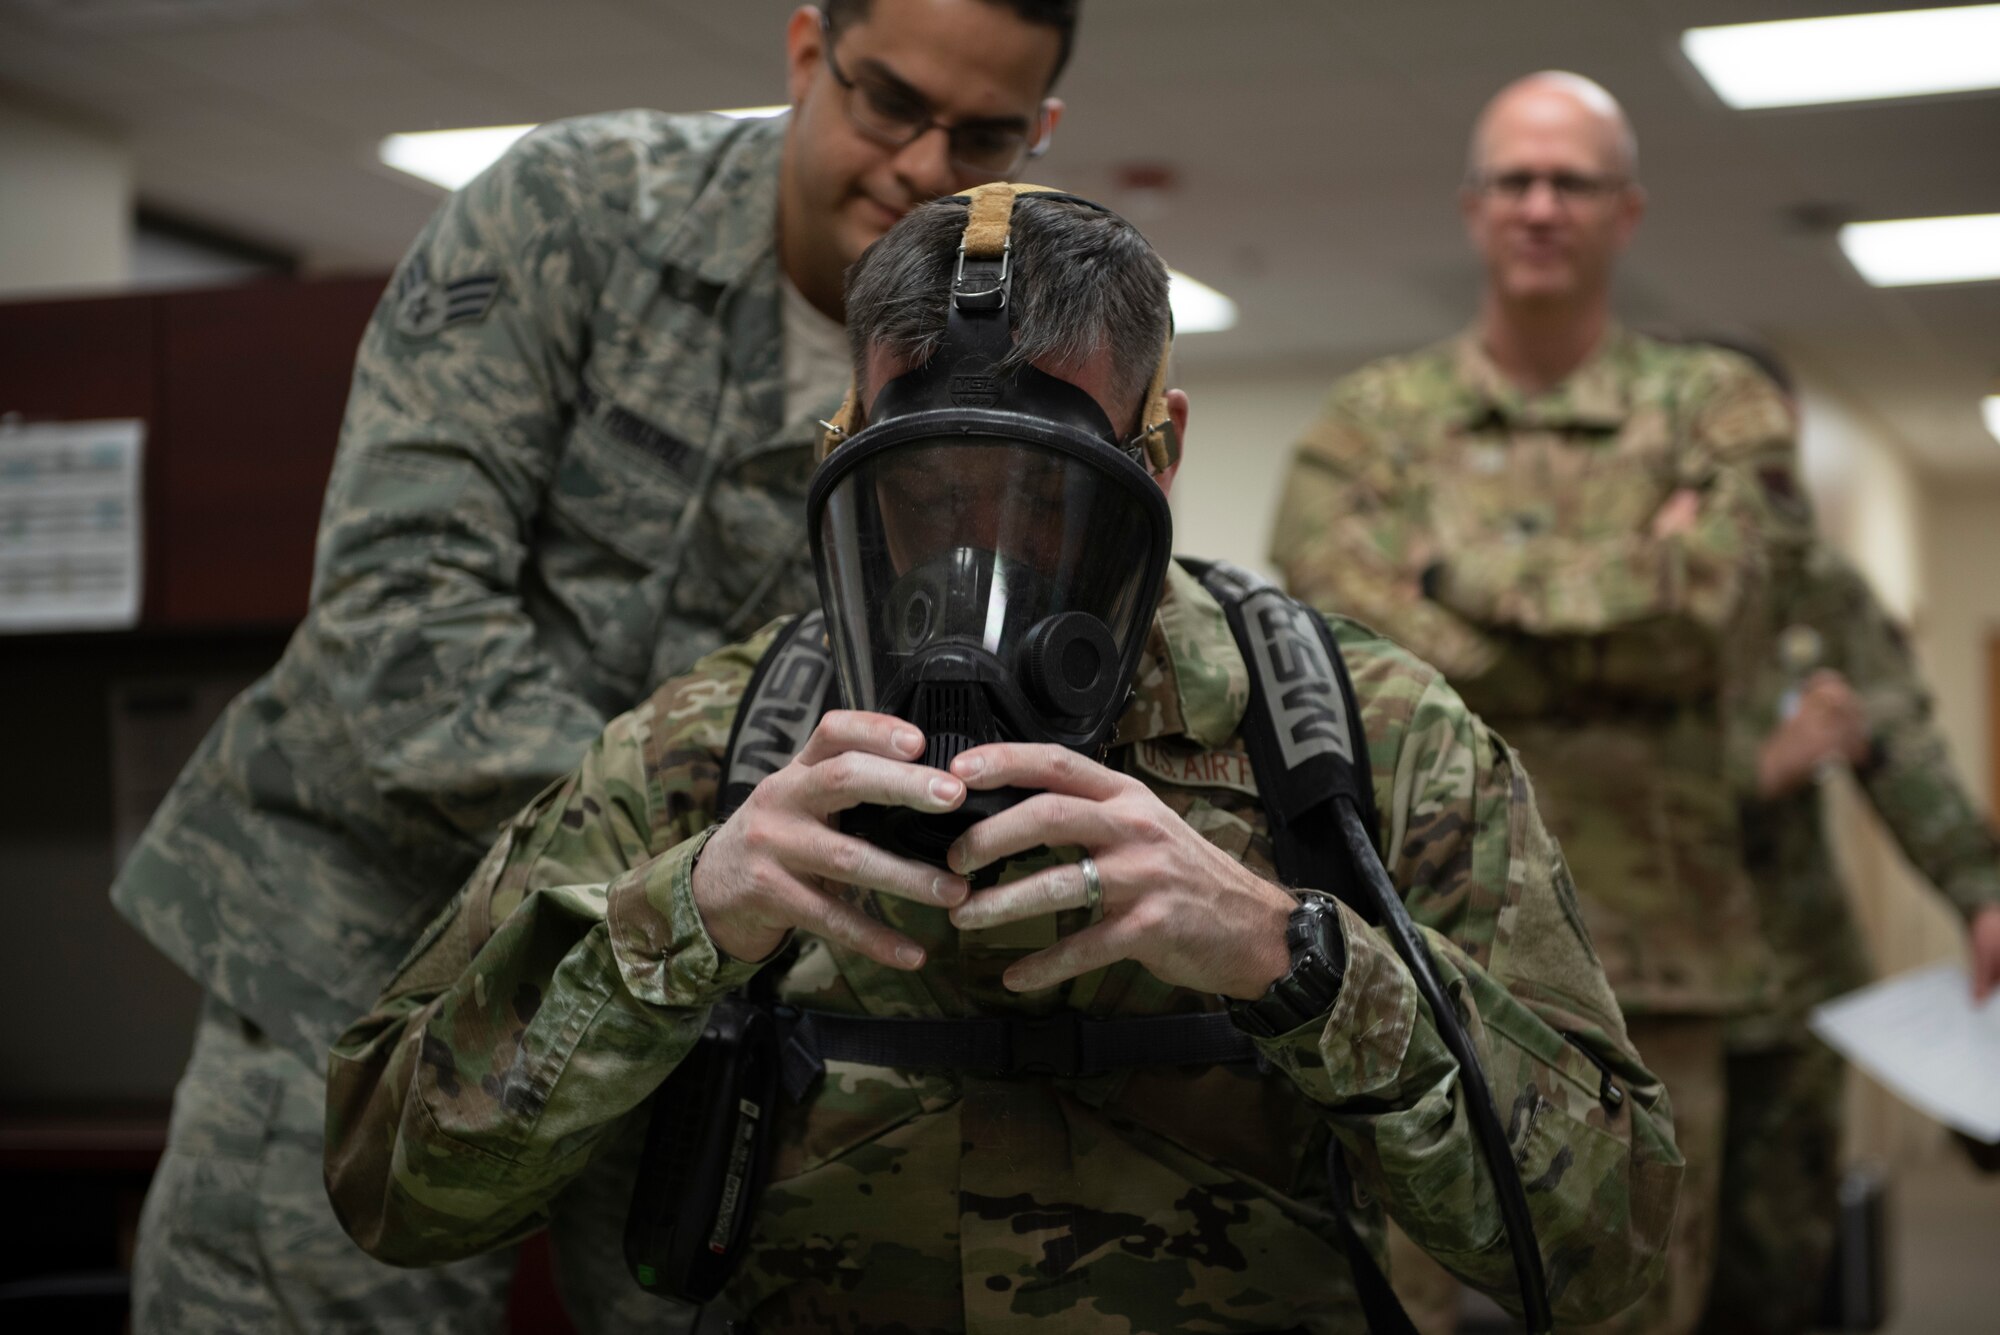 A photo of leadership putting on a breathing apparatus during an immersion tour.